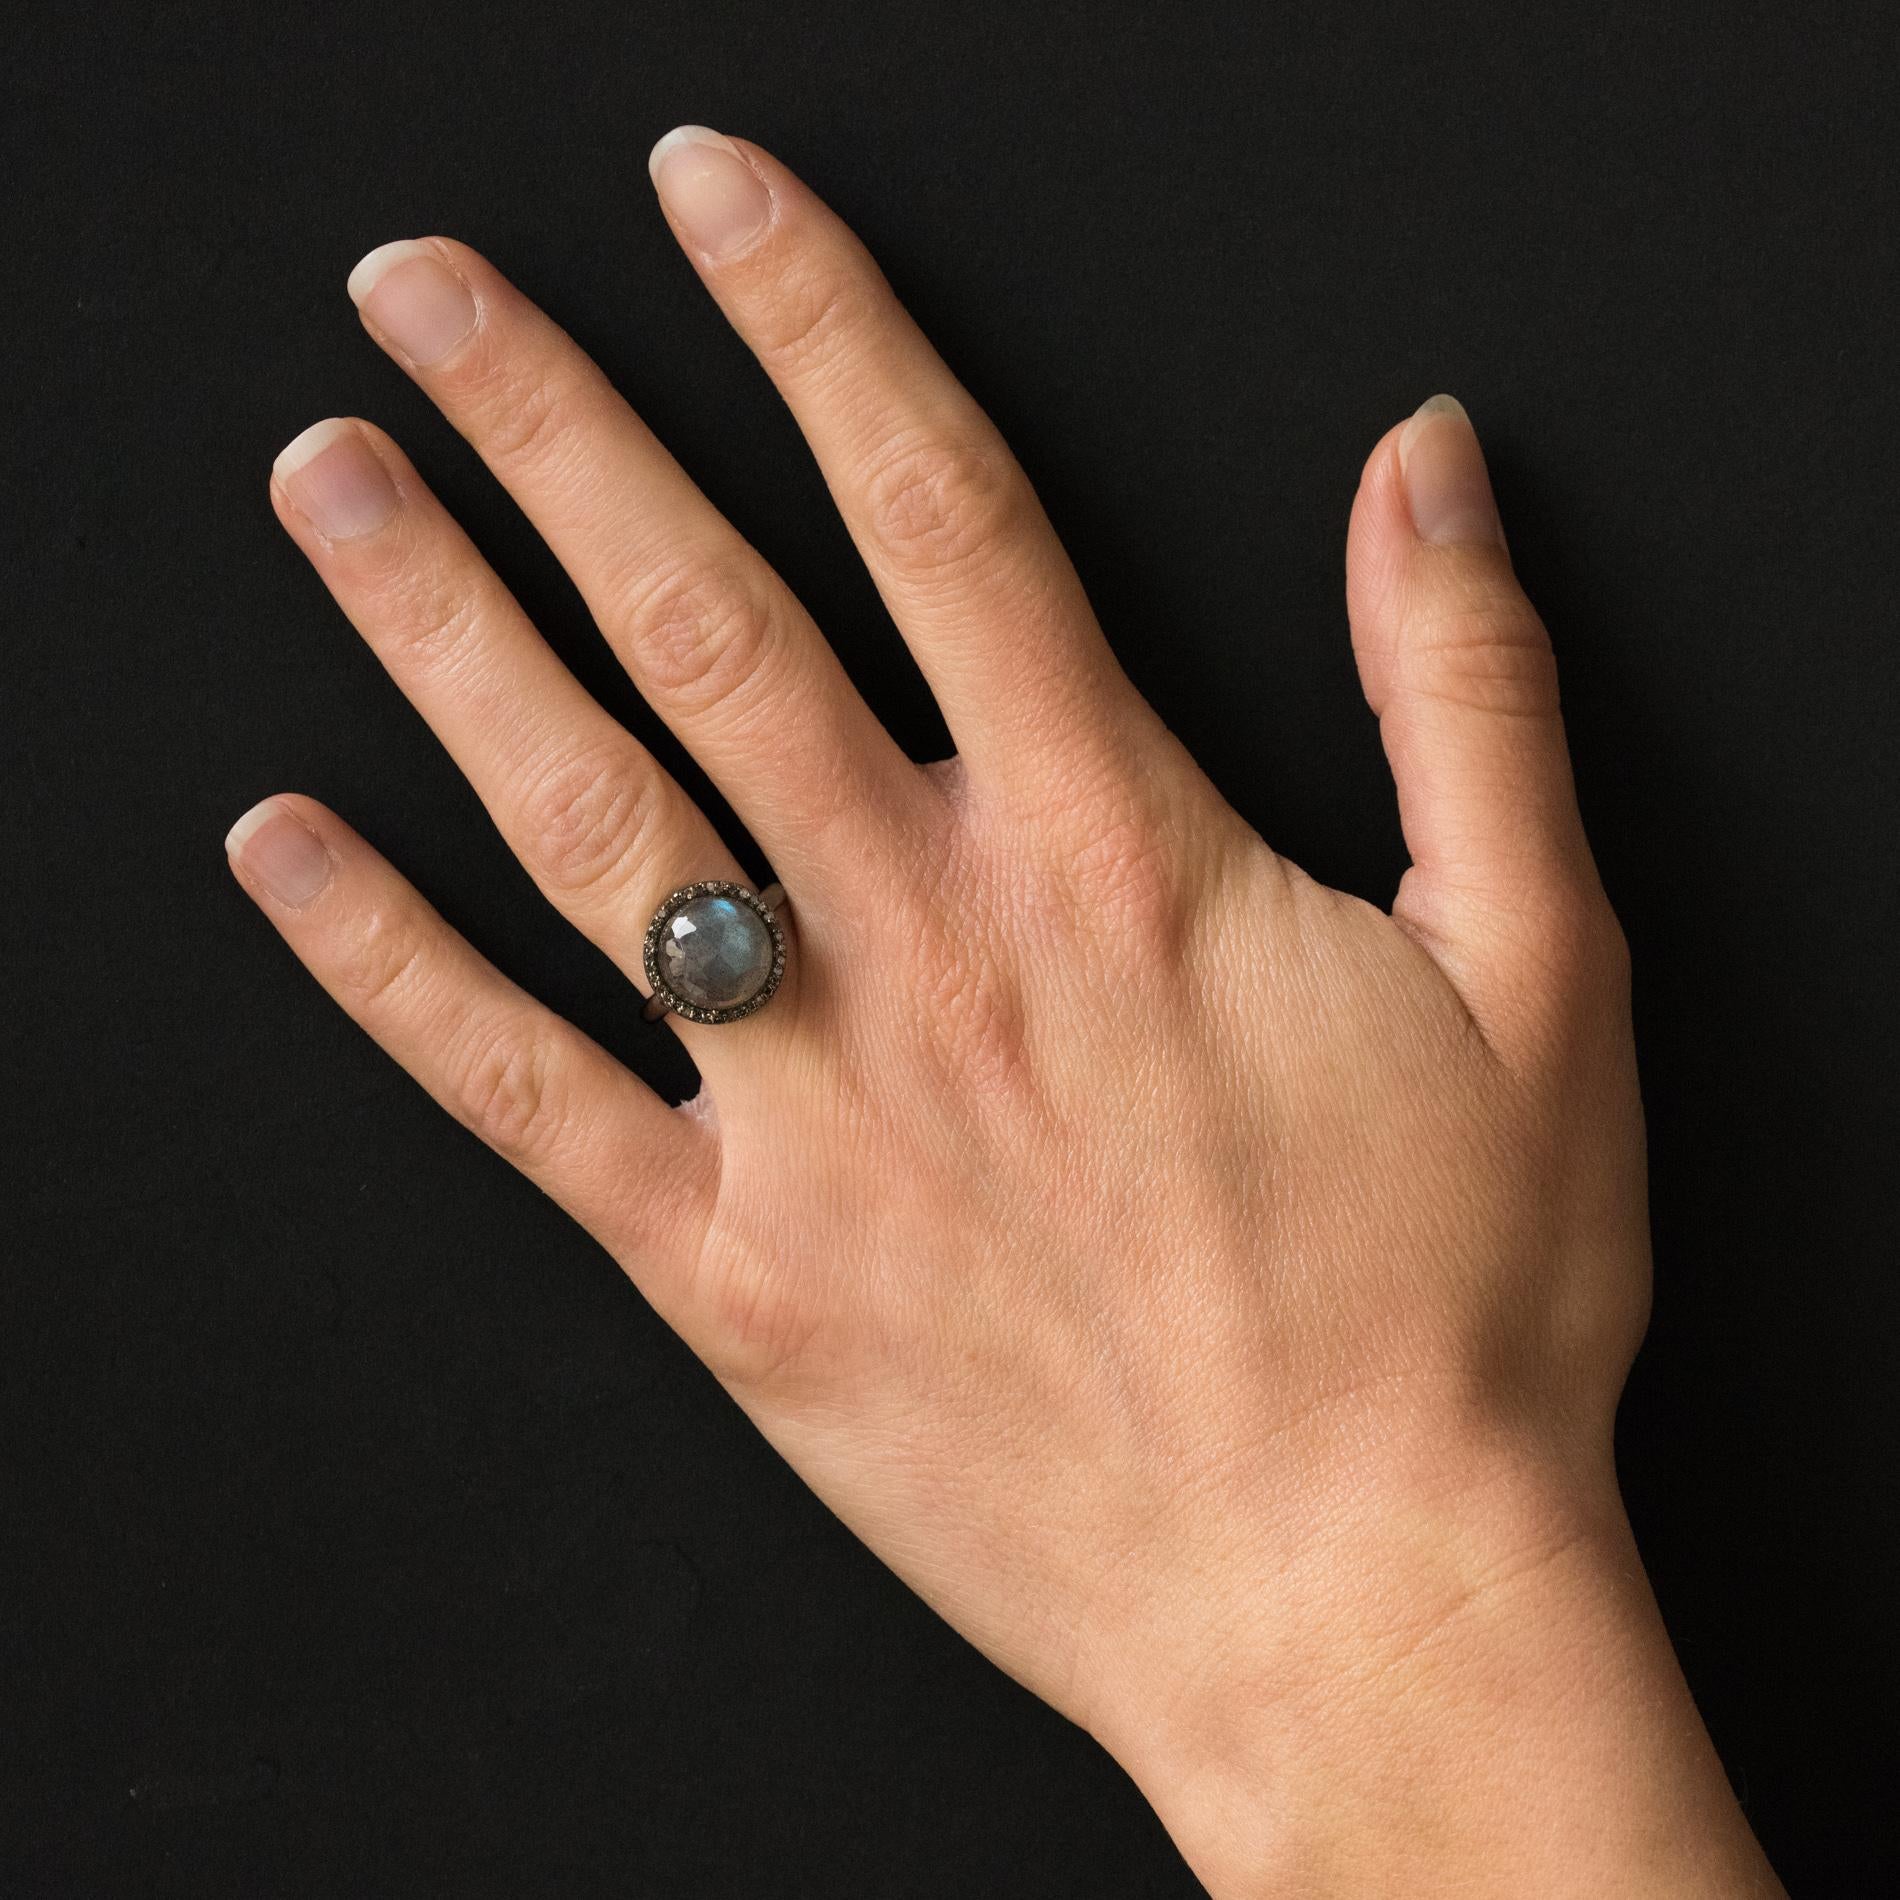 Ring in silver, black rhodium.
Lovely ring of round shape, it is set in the center with 4 claws of a cabochon faceted labradorite surrounded by small diamonds.
Diameter: 1.4 cm, thickness: 7 mm.
Width of the ring at the base: 2.5 mm.
Total weight of